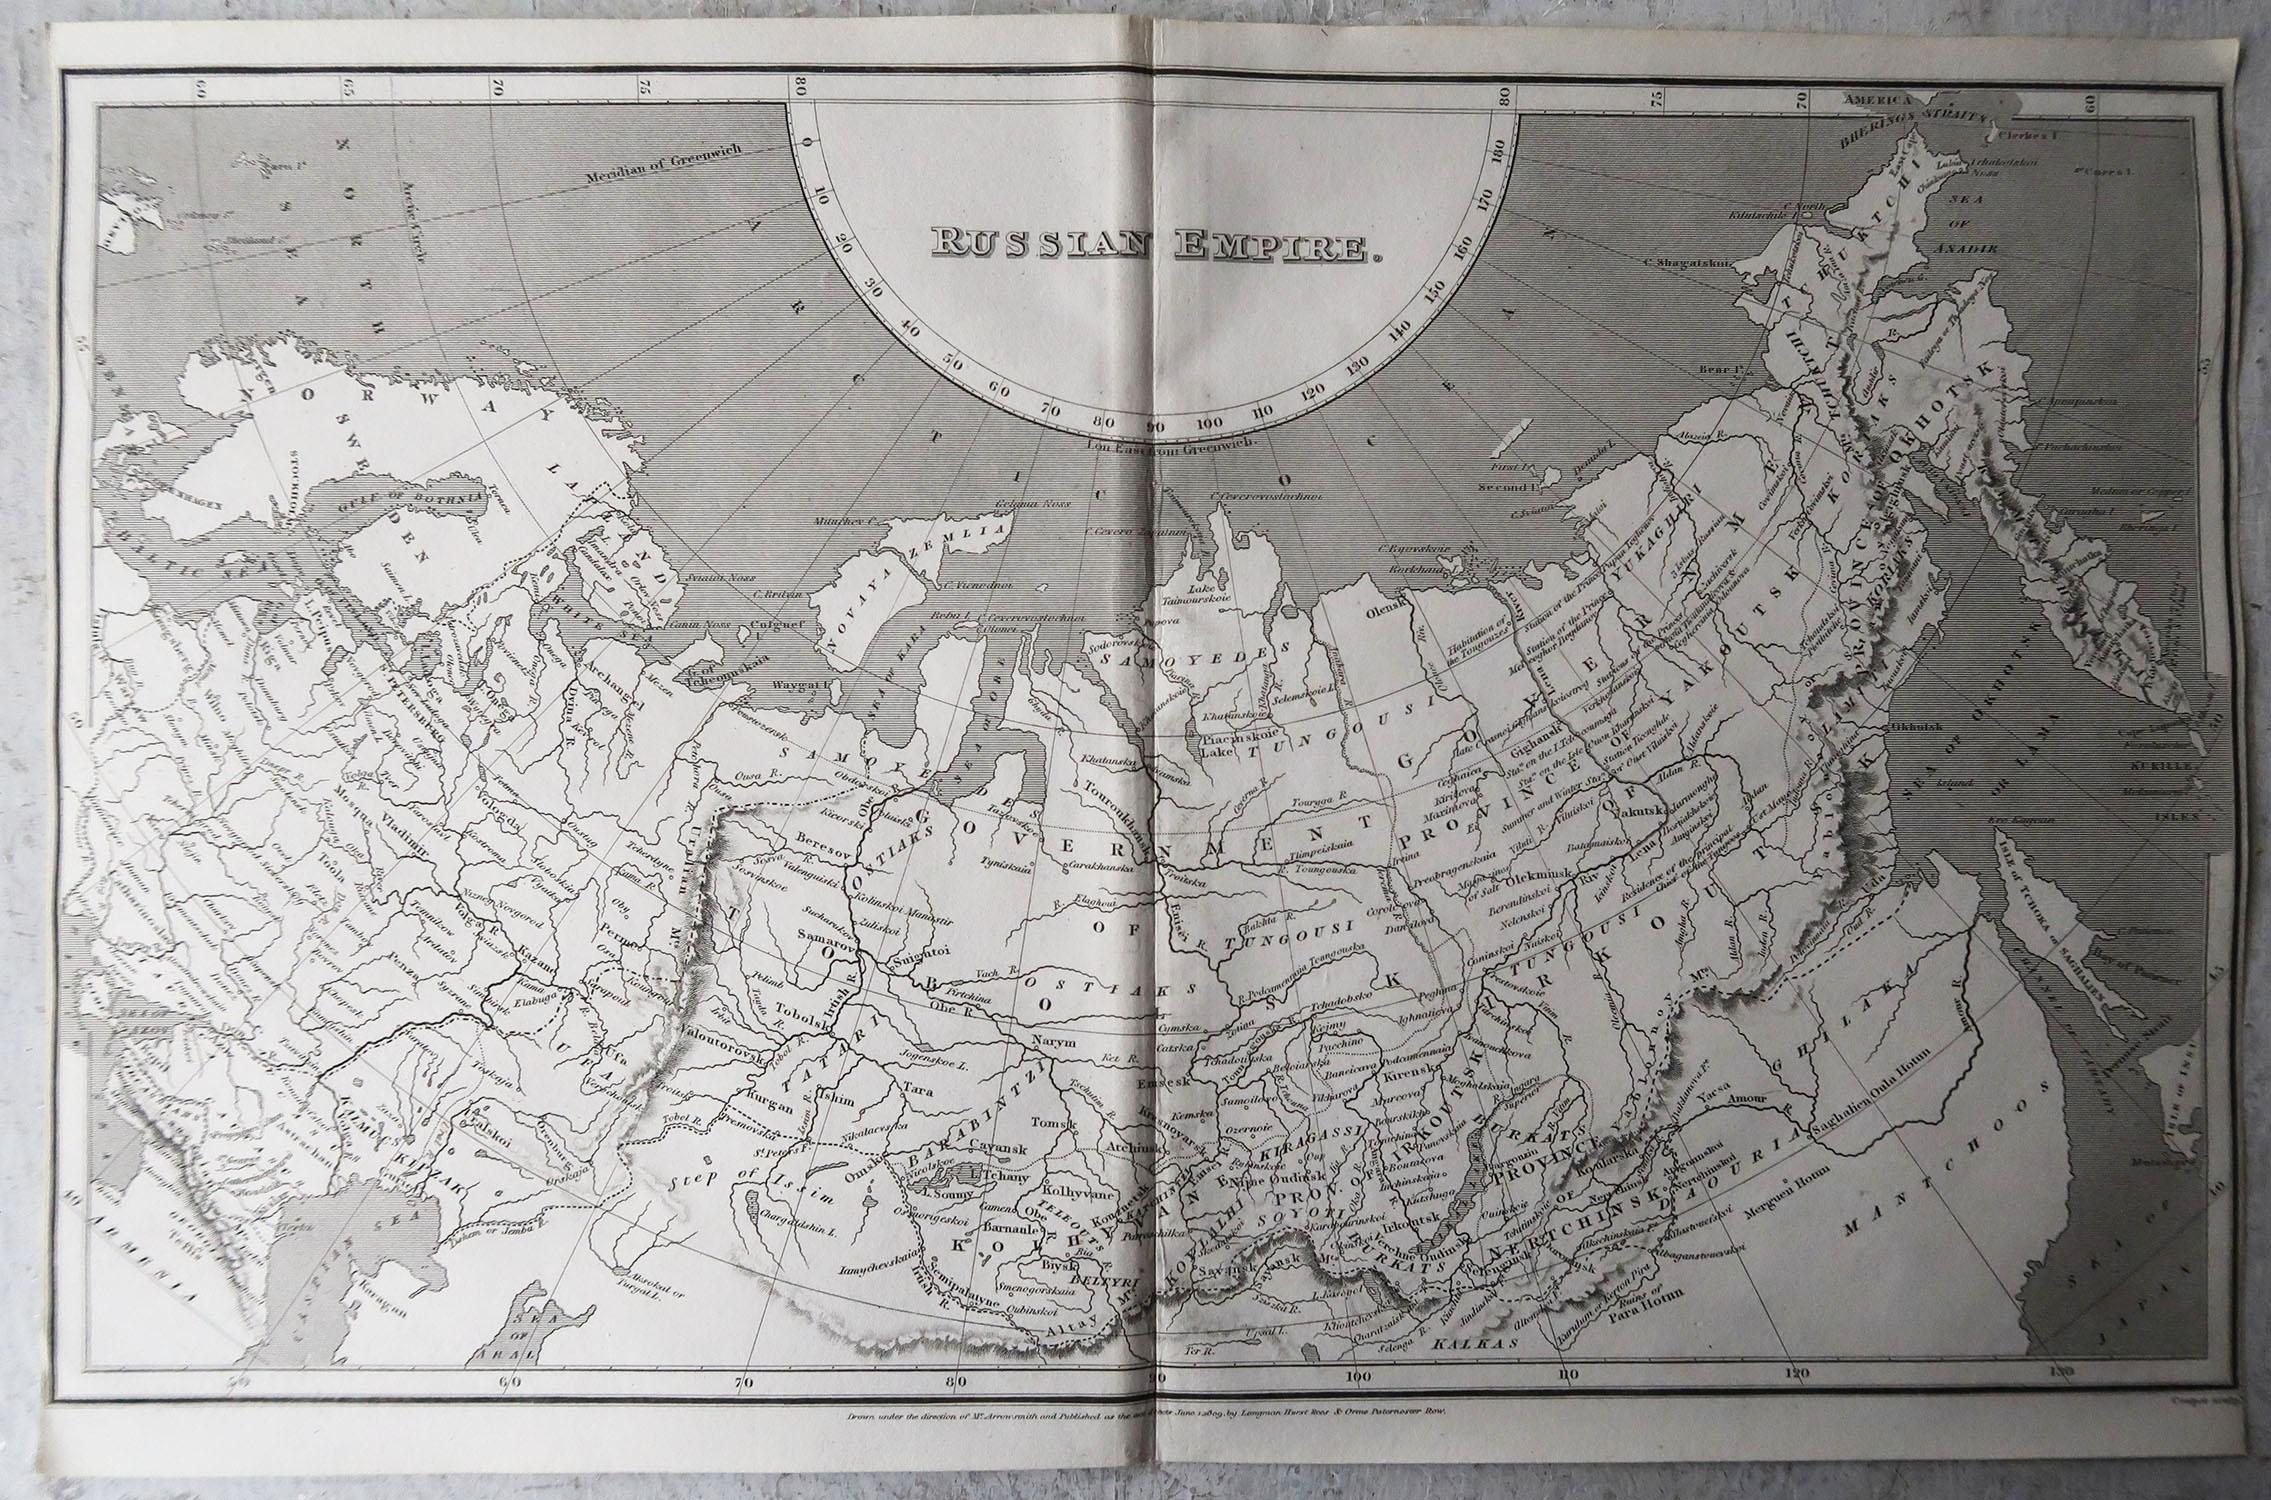 Great map of Russia

Drawn under the direction of Arrowsmith

Copper-plate engraving

Published by Longman, Hurst, Rees, Orme and Brown, 1820

Unframed.